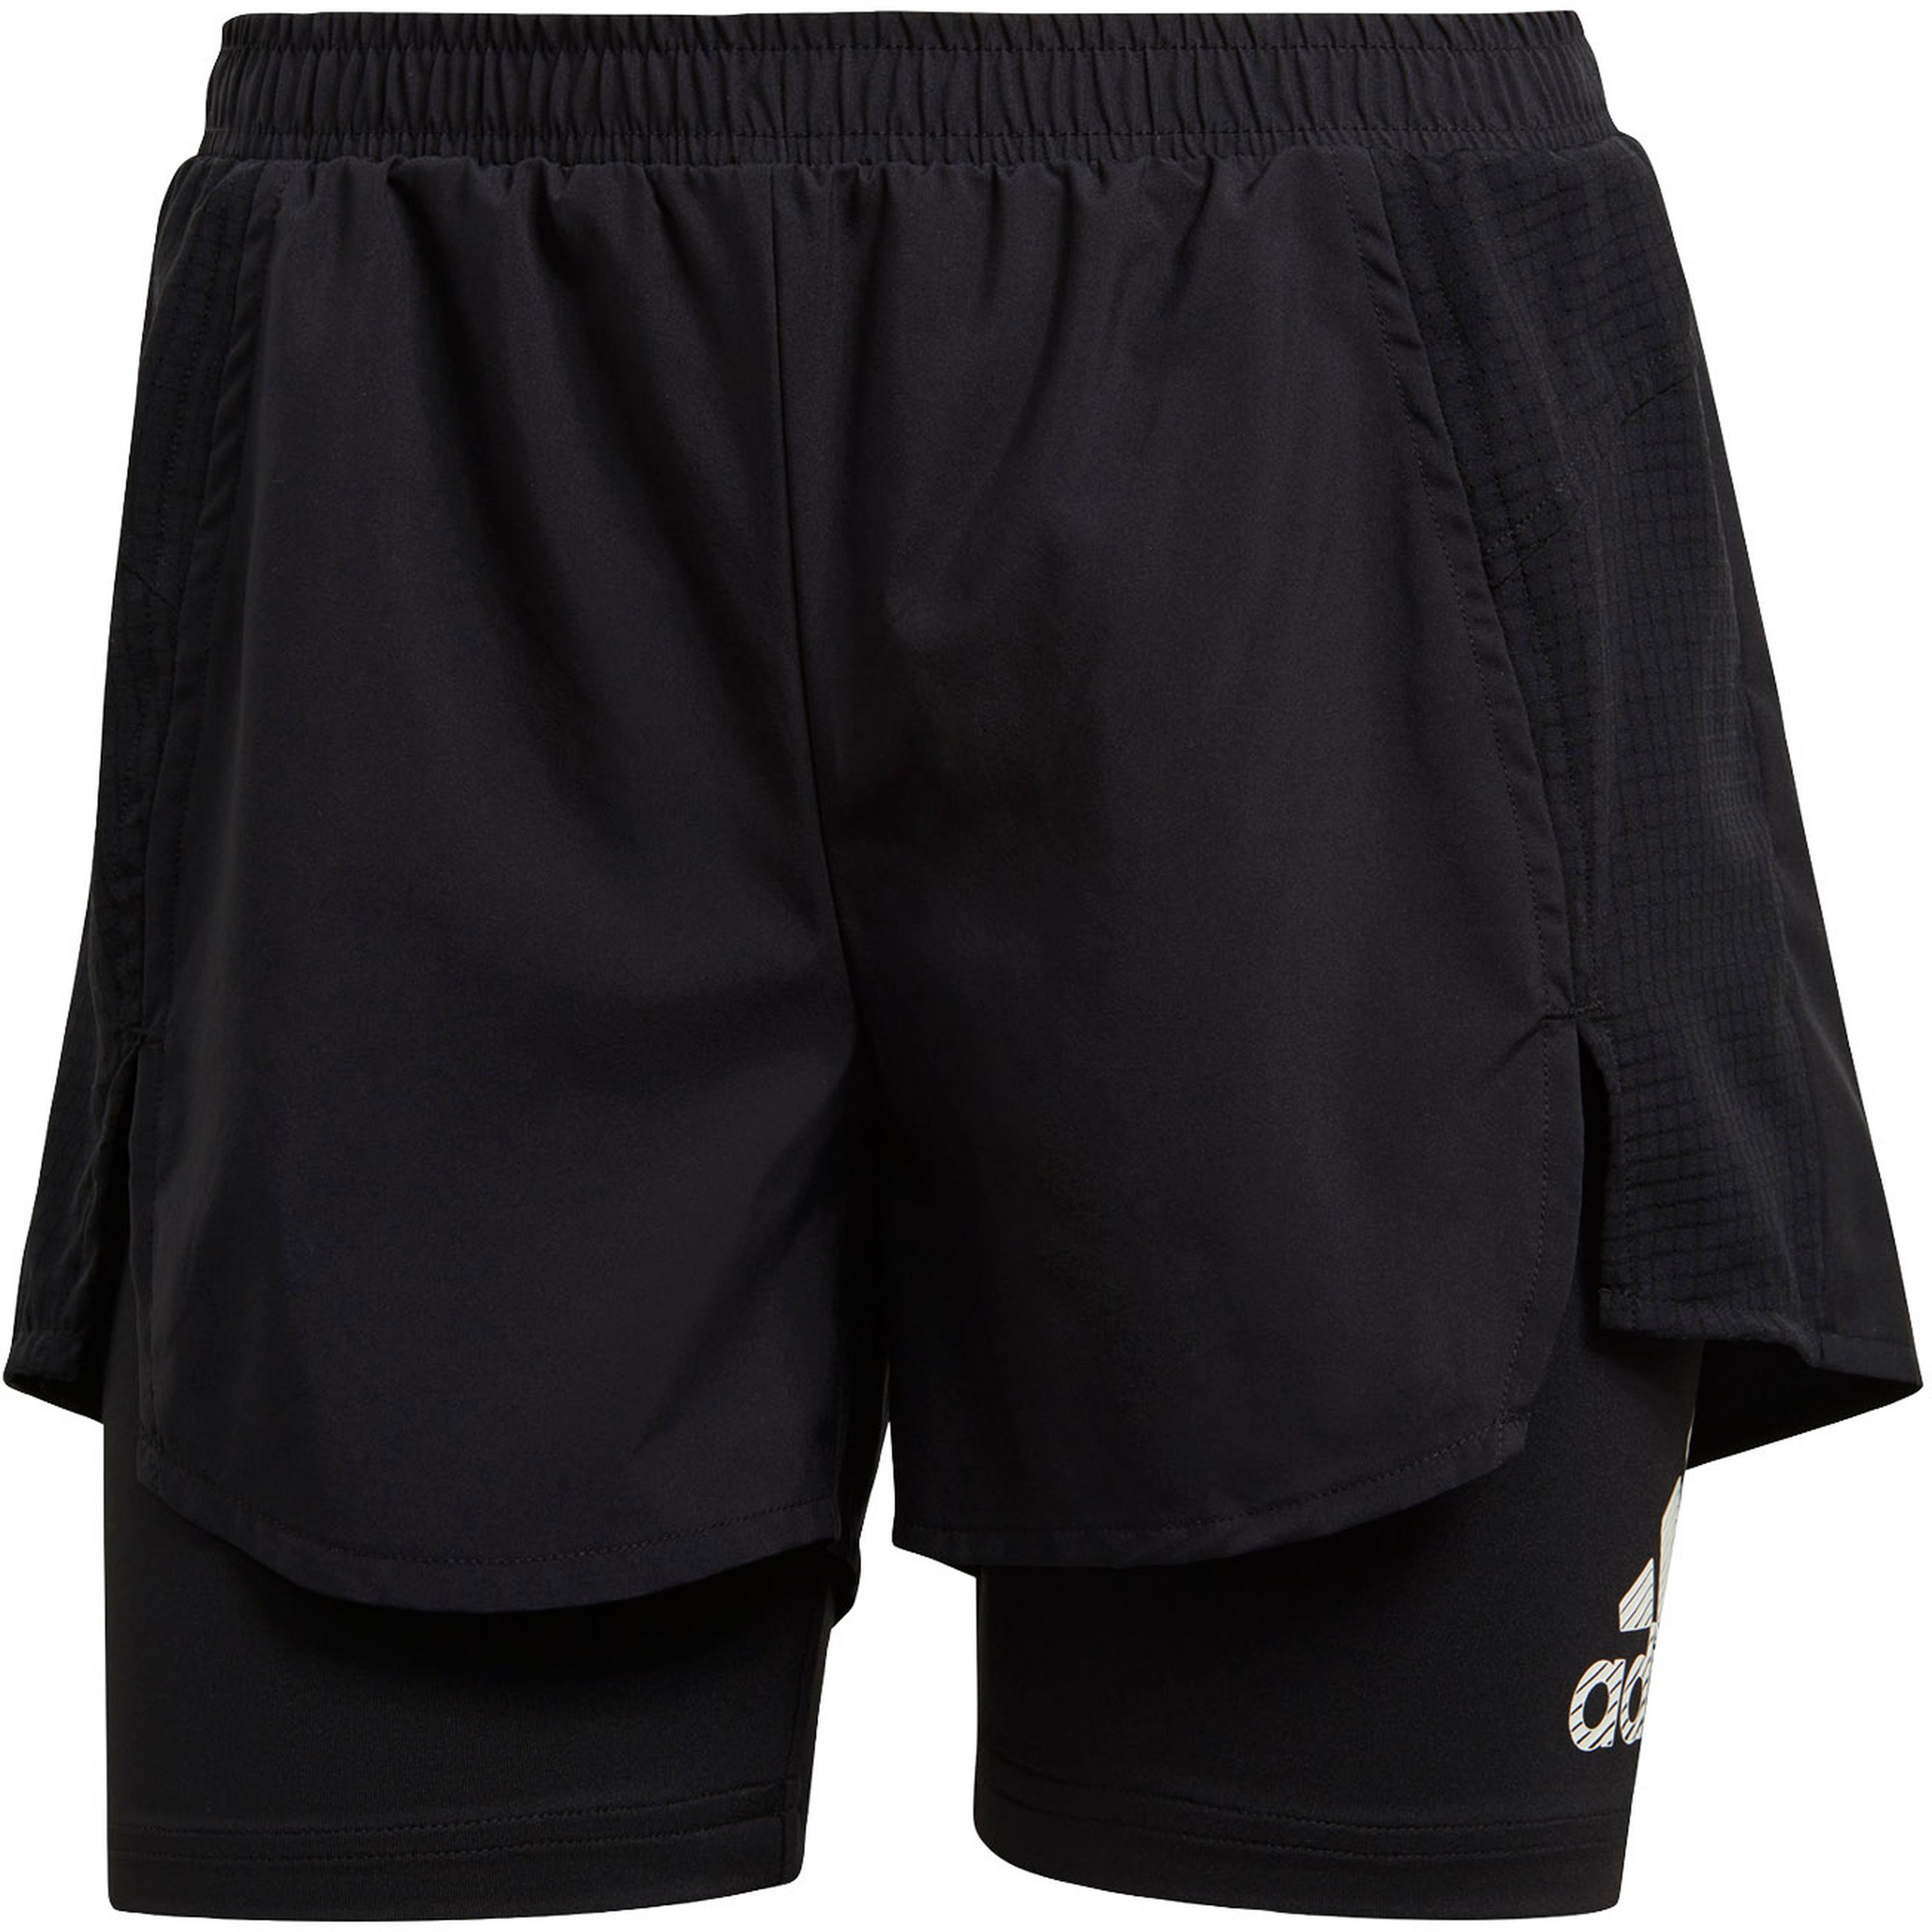 Image of adidas 2 IN 1 ACTIVATED TECH DESIGNED2MOVE Funktionsshorts Damen